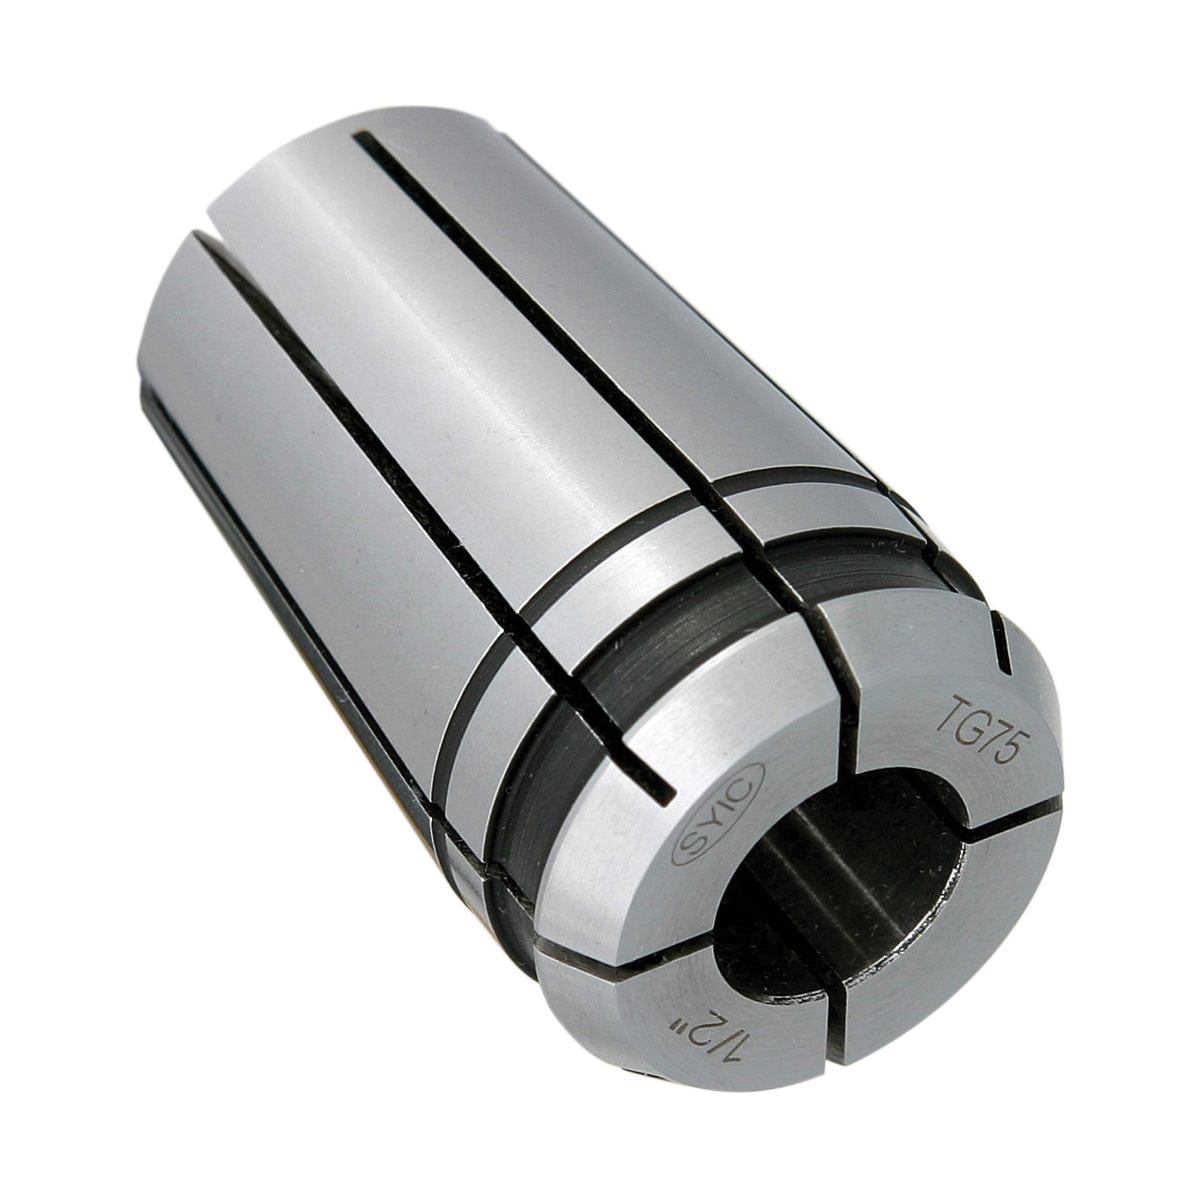 TG75 13/32" COLLET